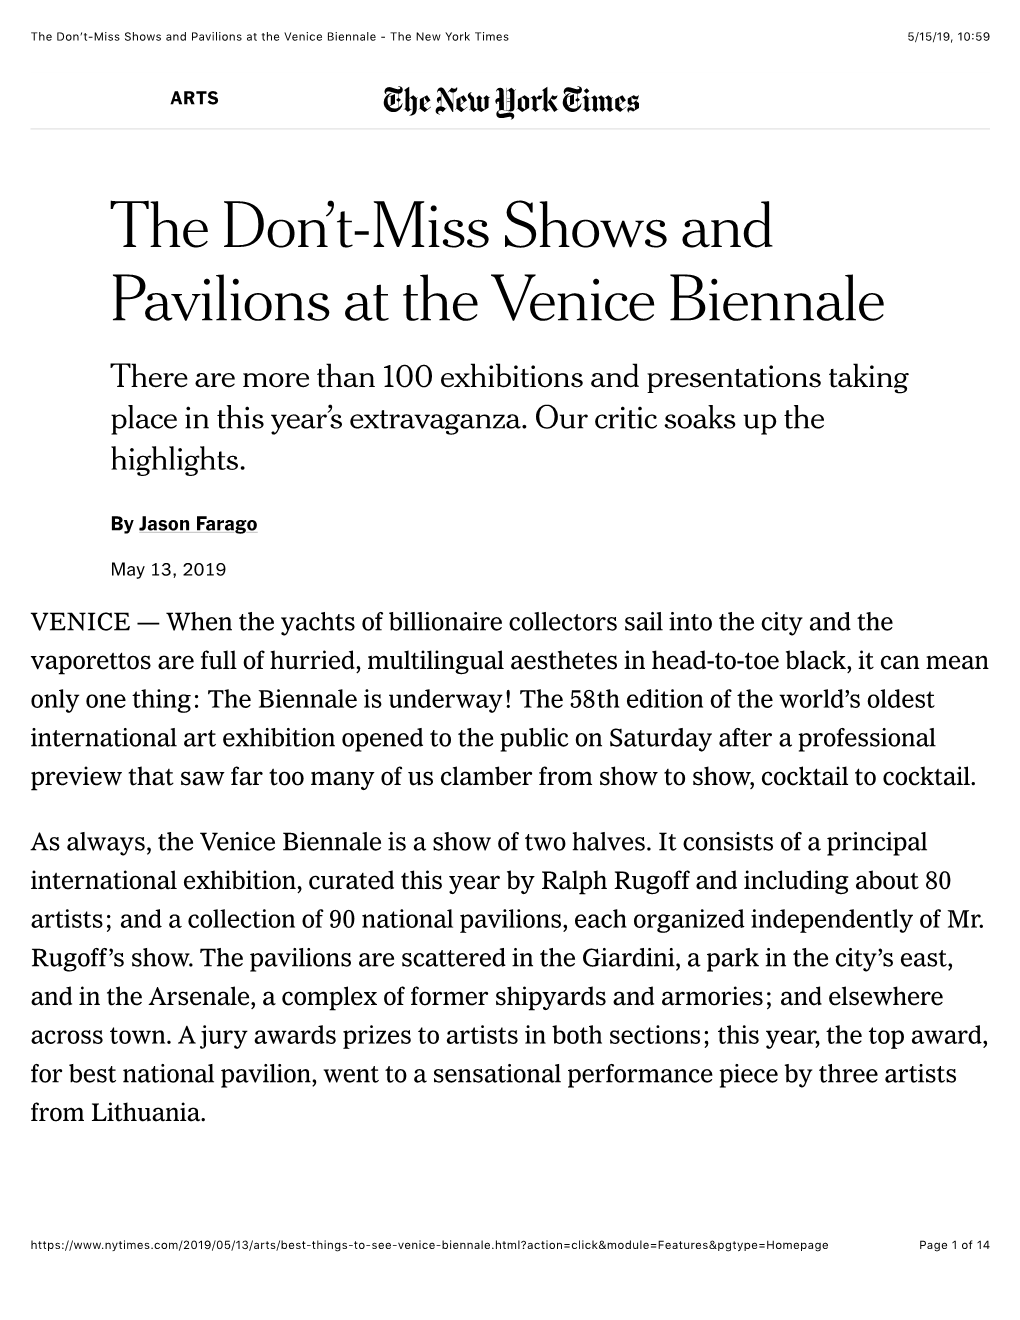 The Don't-Miss Shows and Pavilions at the Venice Biennale